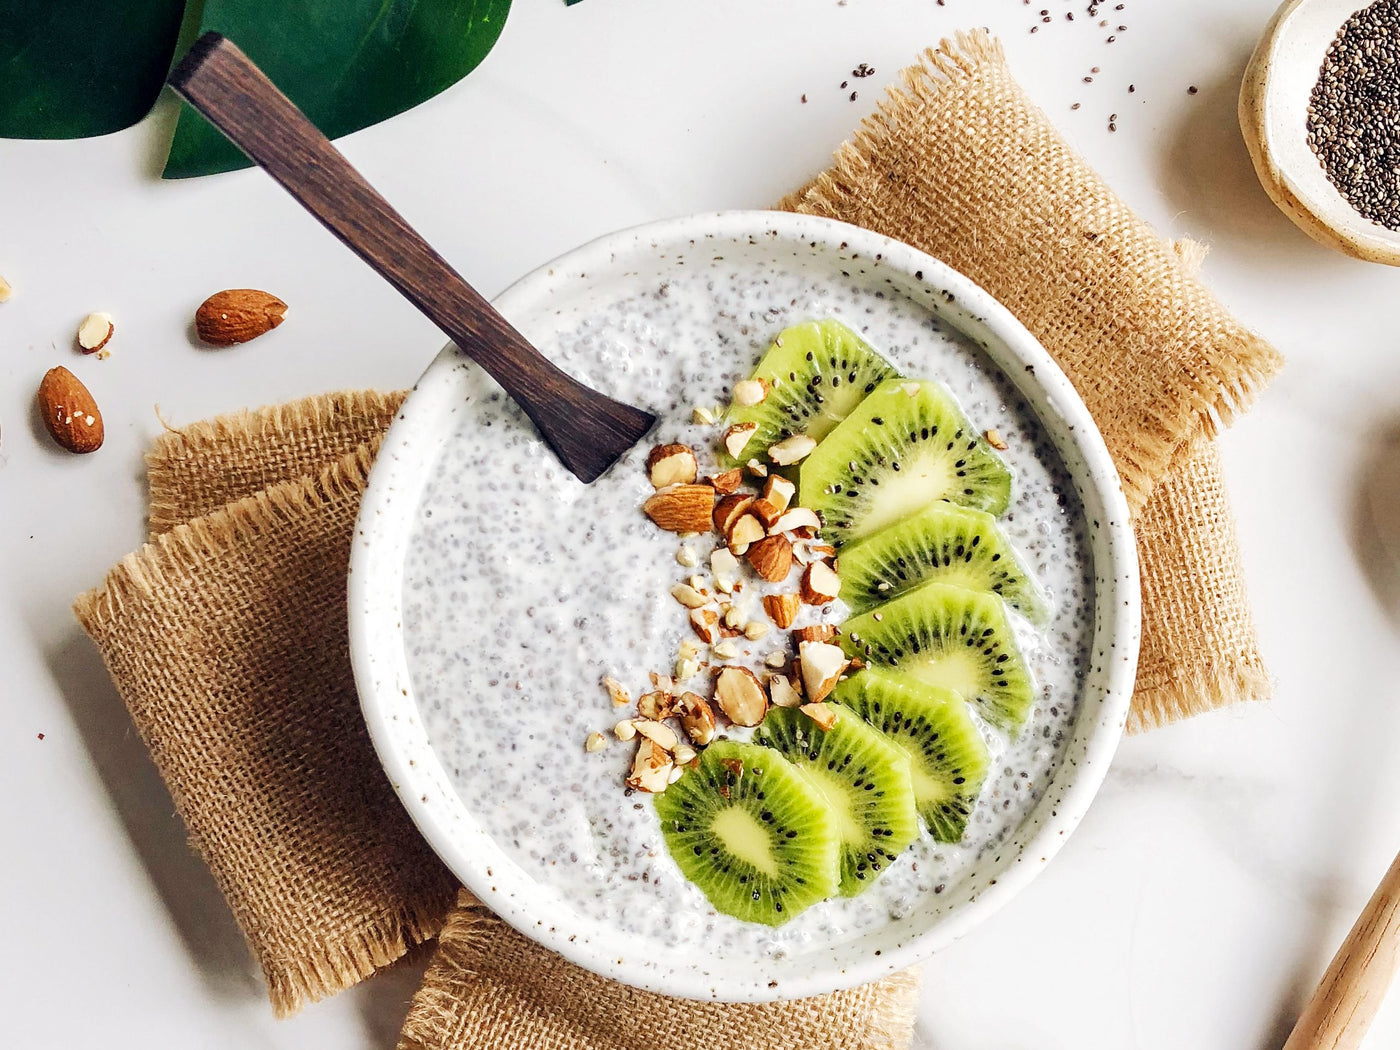 Chia seed pudding from Sophie Guidolin recipes with kiwi and crushed nuts in a white bowl